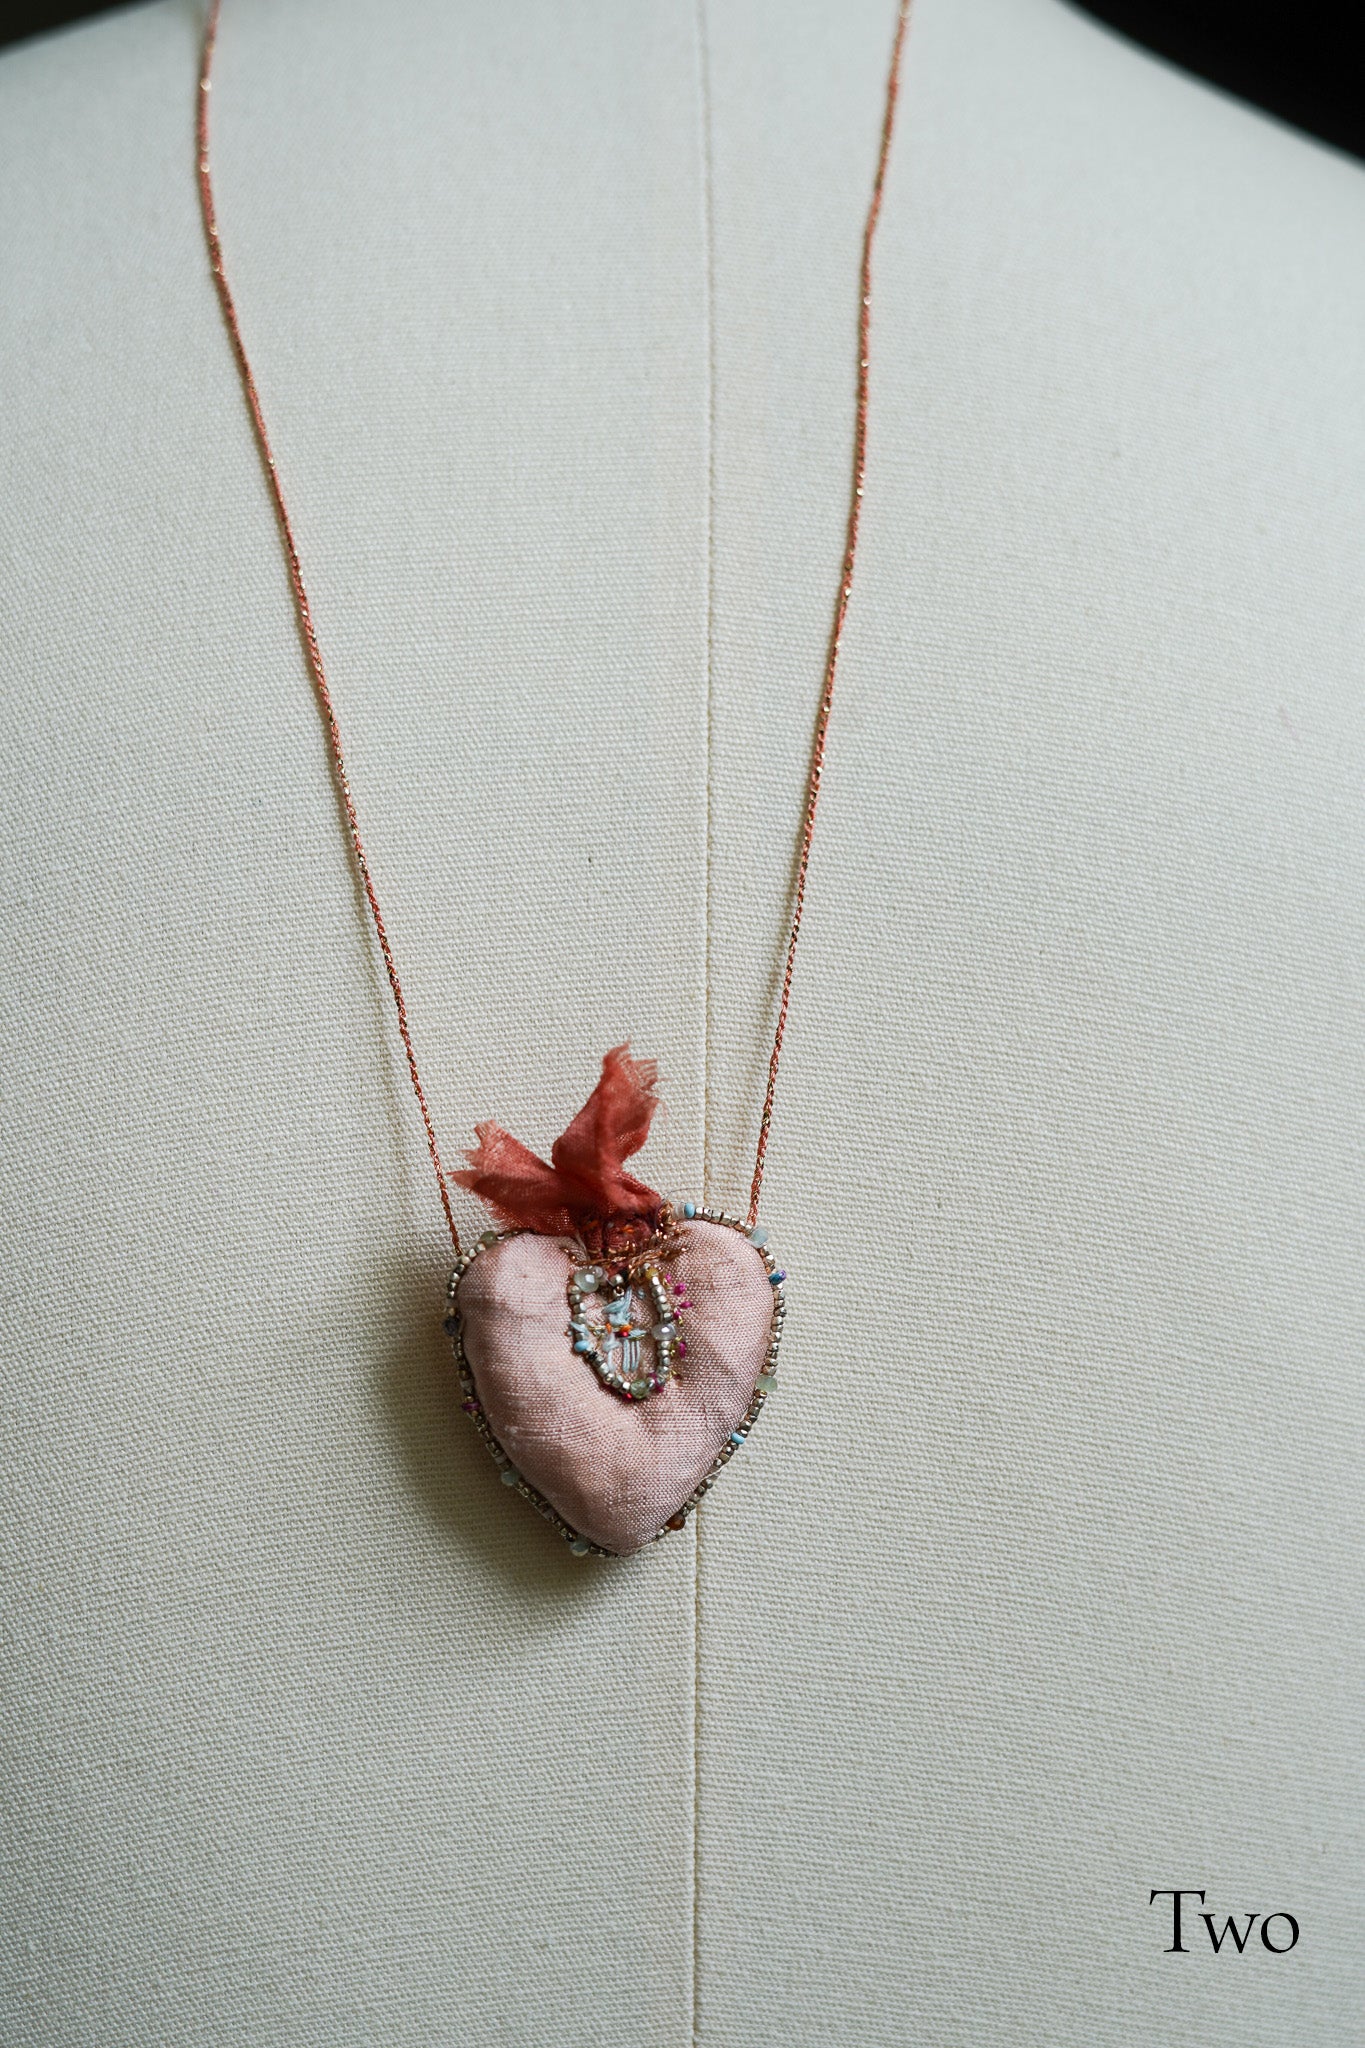 Embroidered Heart Necklace - Handmade in Italy